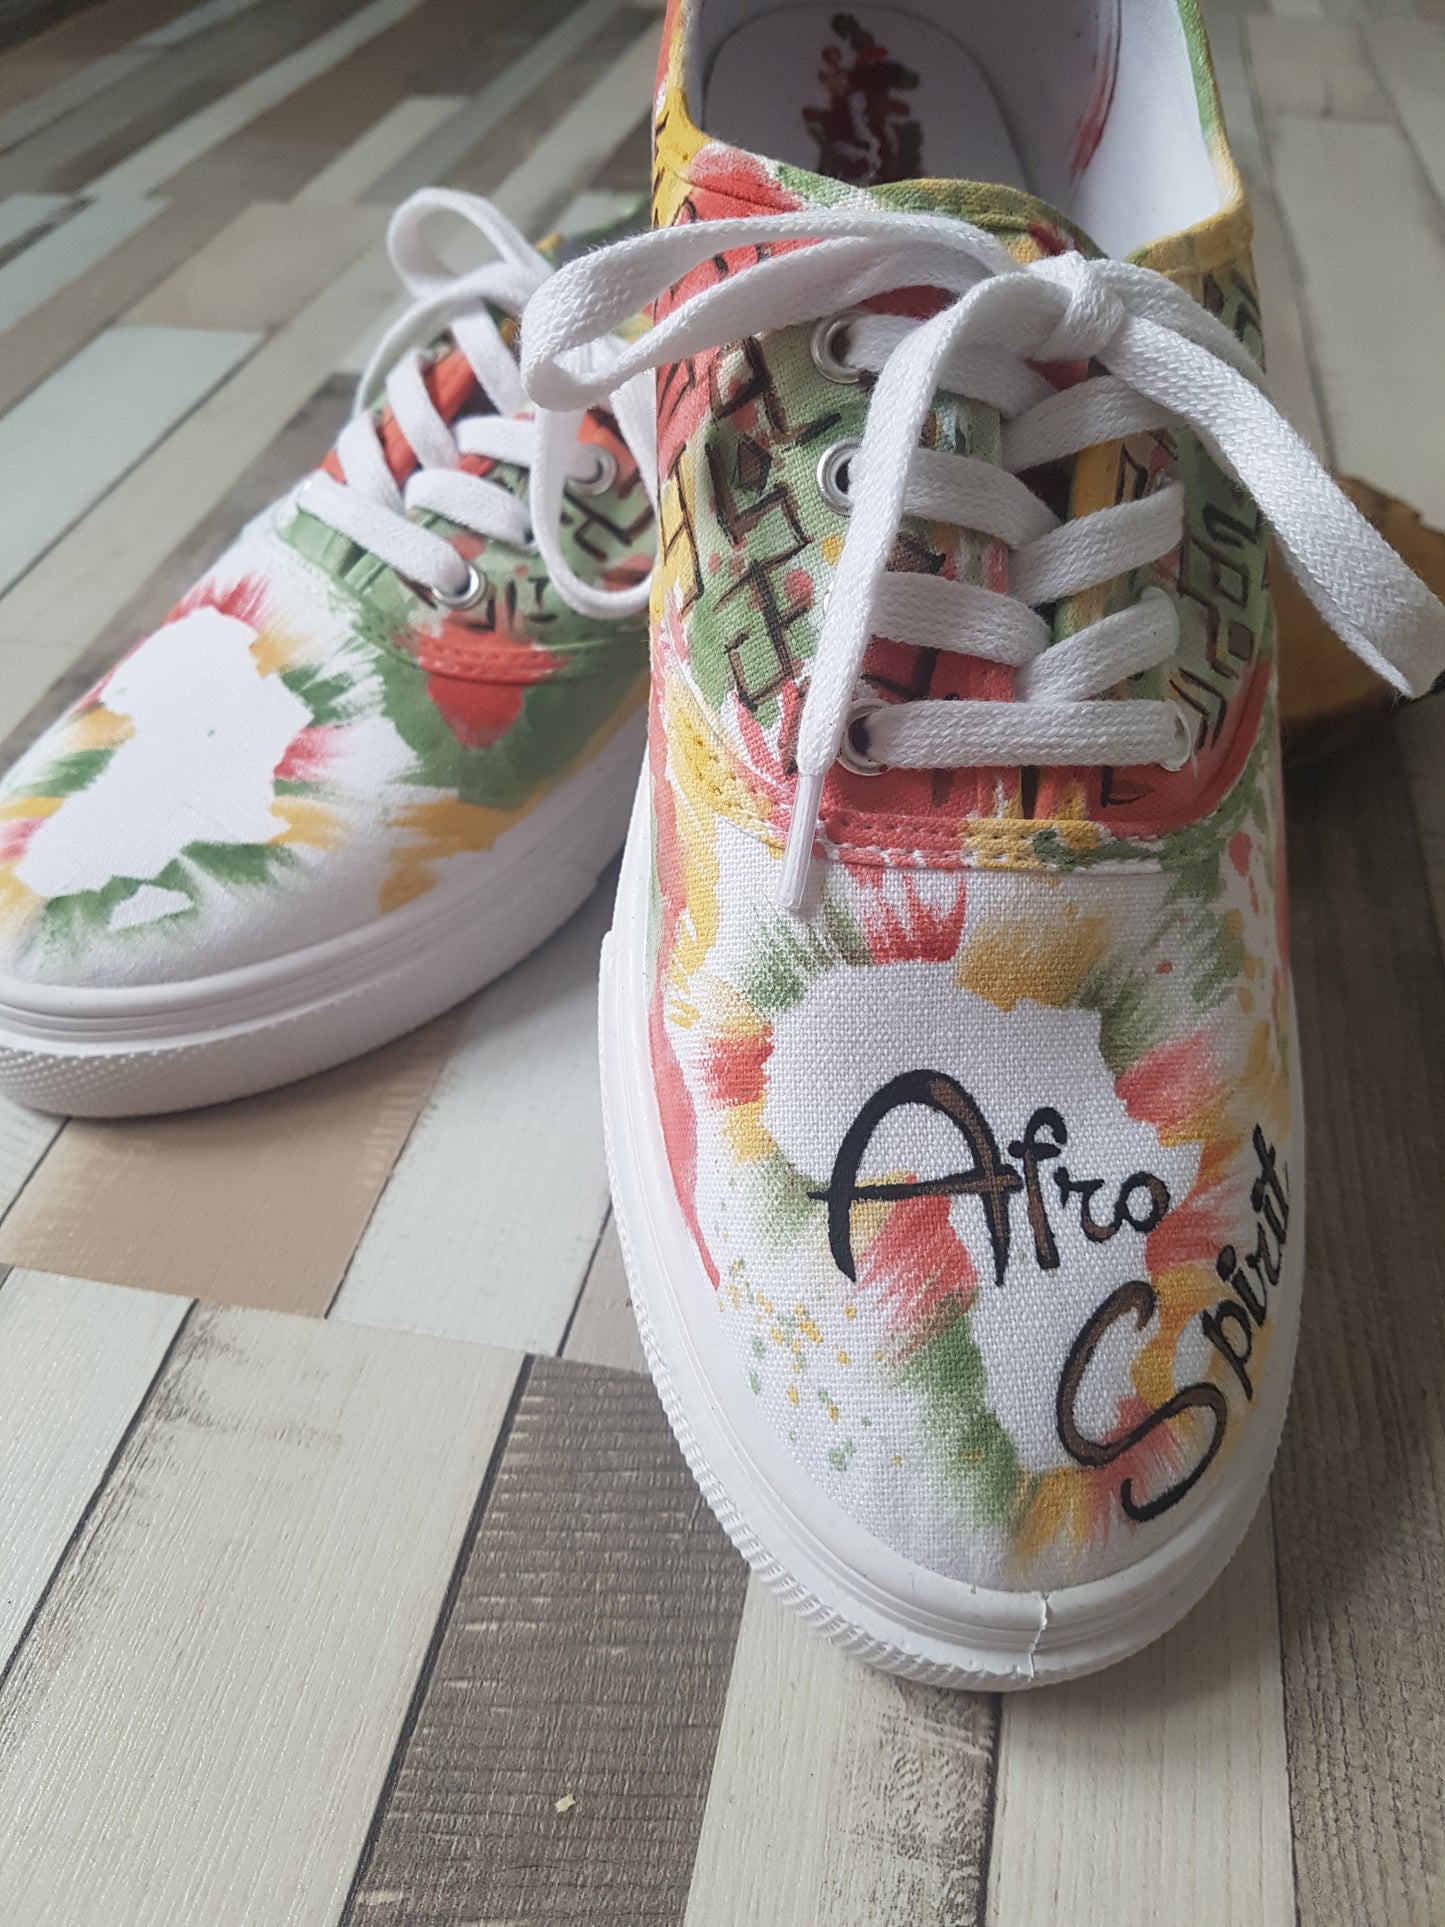 Tenisi Pictati, Painted Sneakers, Pictura Manuala Tenisi, handmade shoes, Everyday shoes, Woman Fashion, customized shoes, African model, Afro Spirit